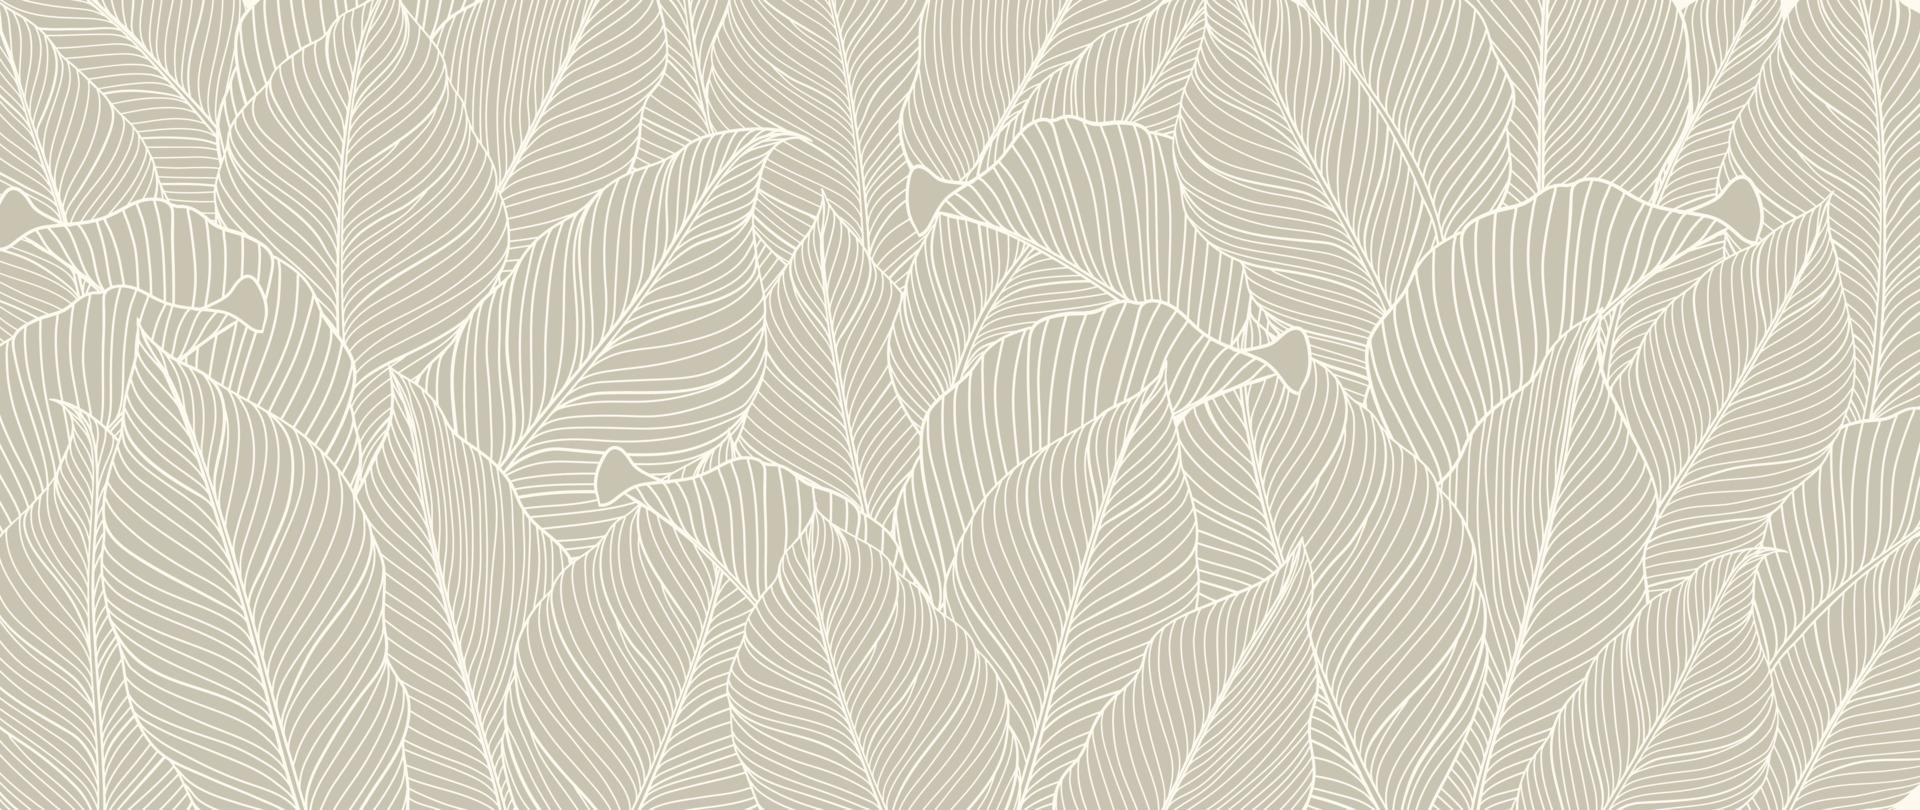 Botanical foliage line art background vector illustration. Tropical palm leaves white drawing contour pattern background. Design for wallpaper, home decor, packaging, print, poster, cover, banner.